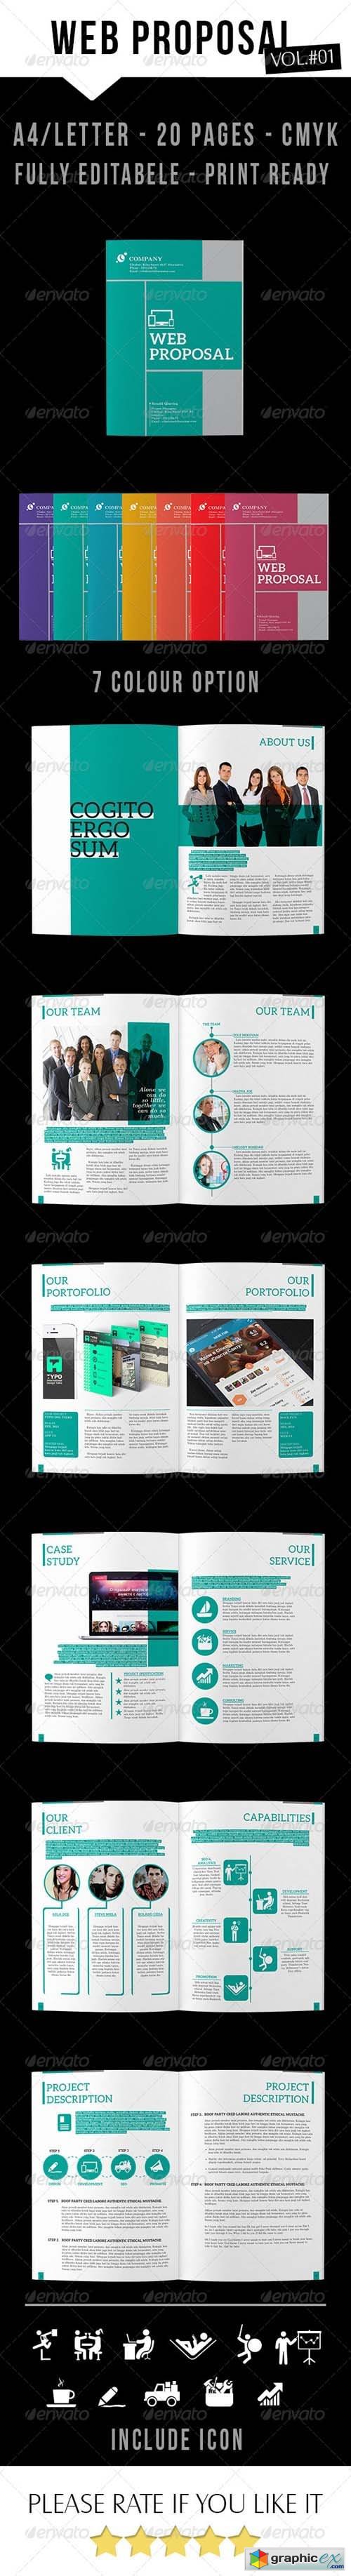 Clean Web Proposal InDesign